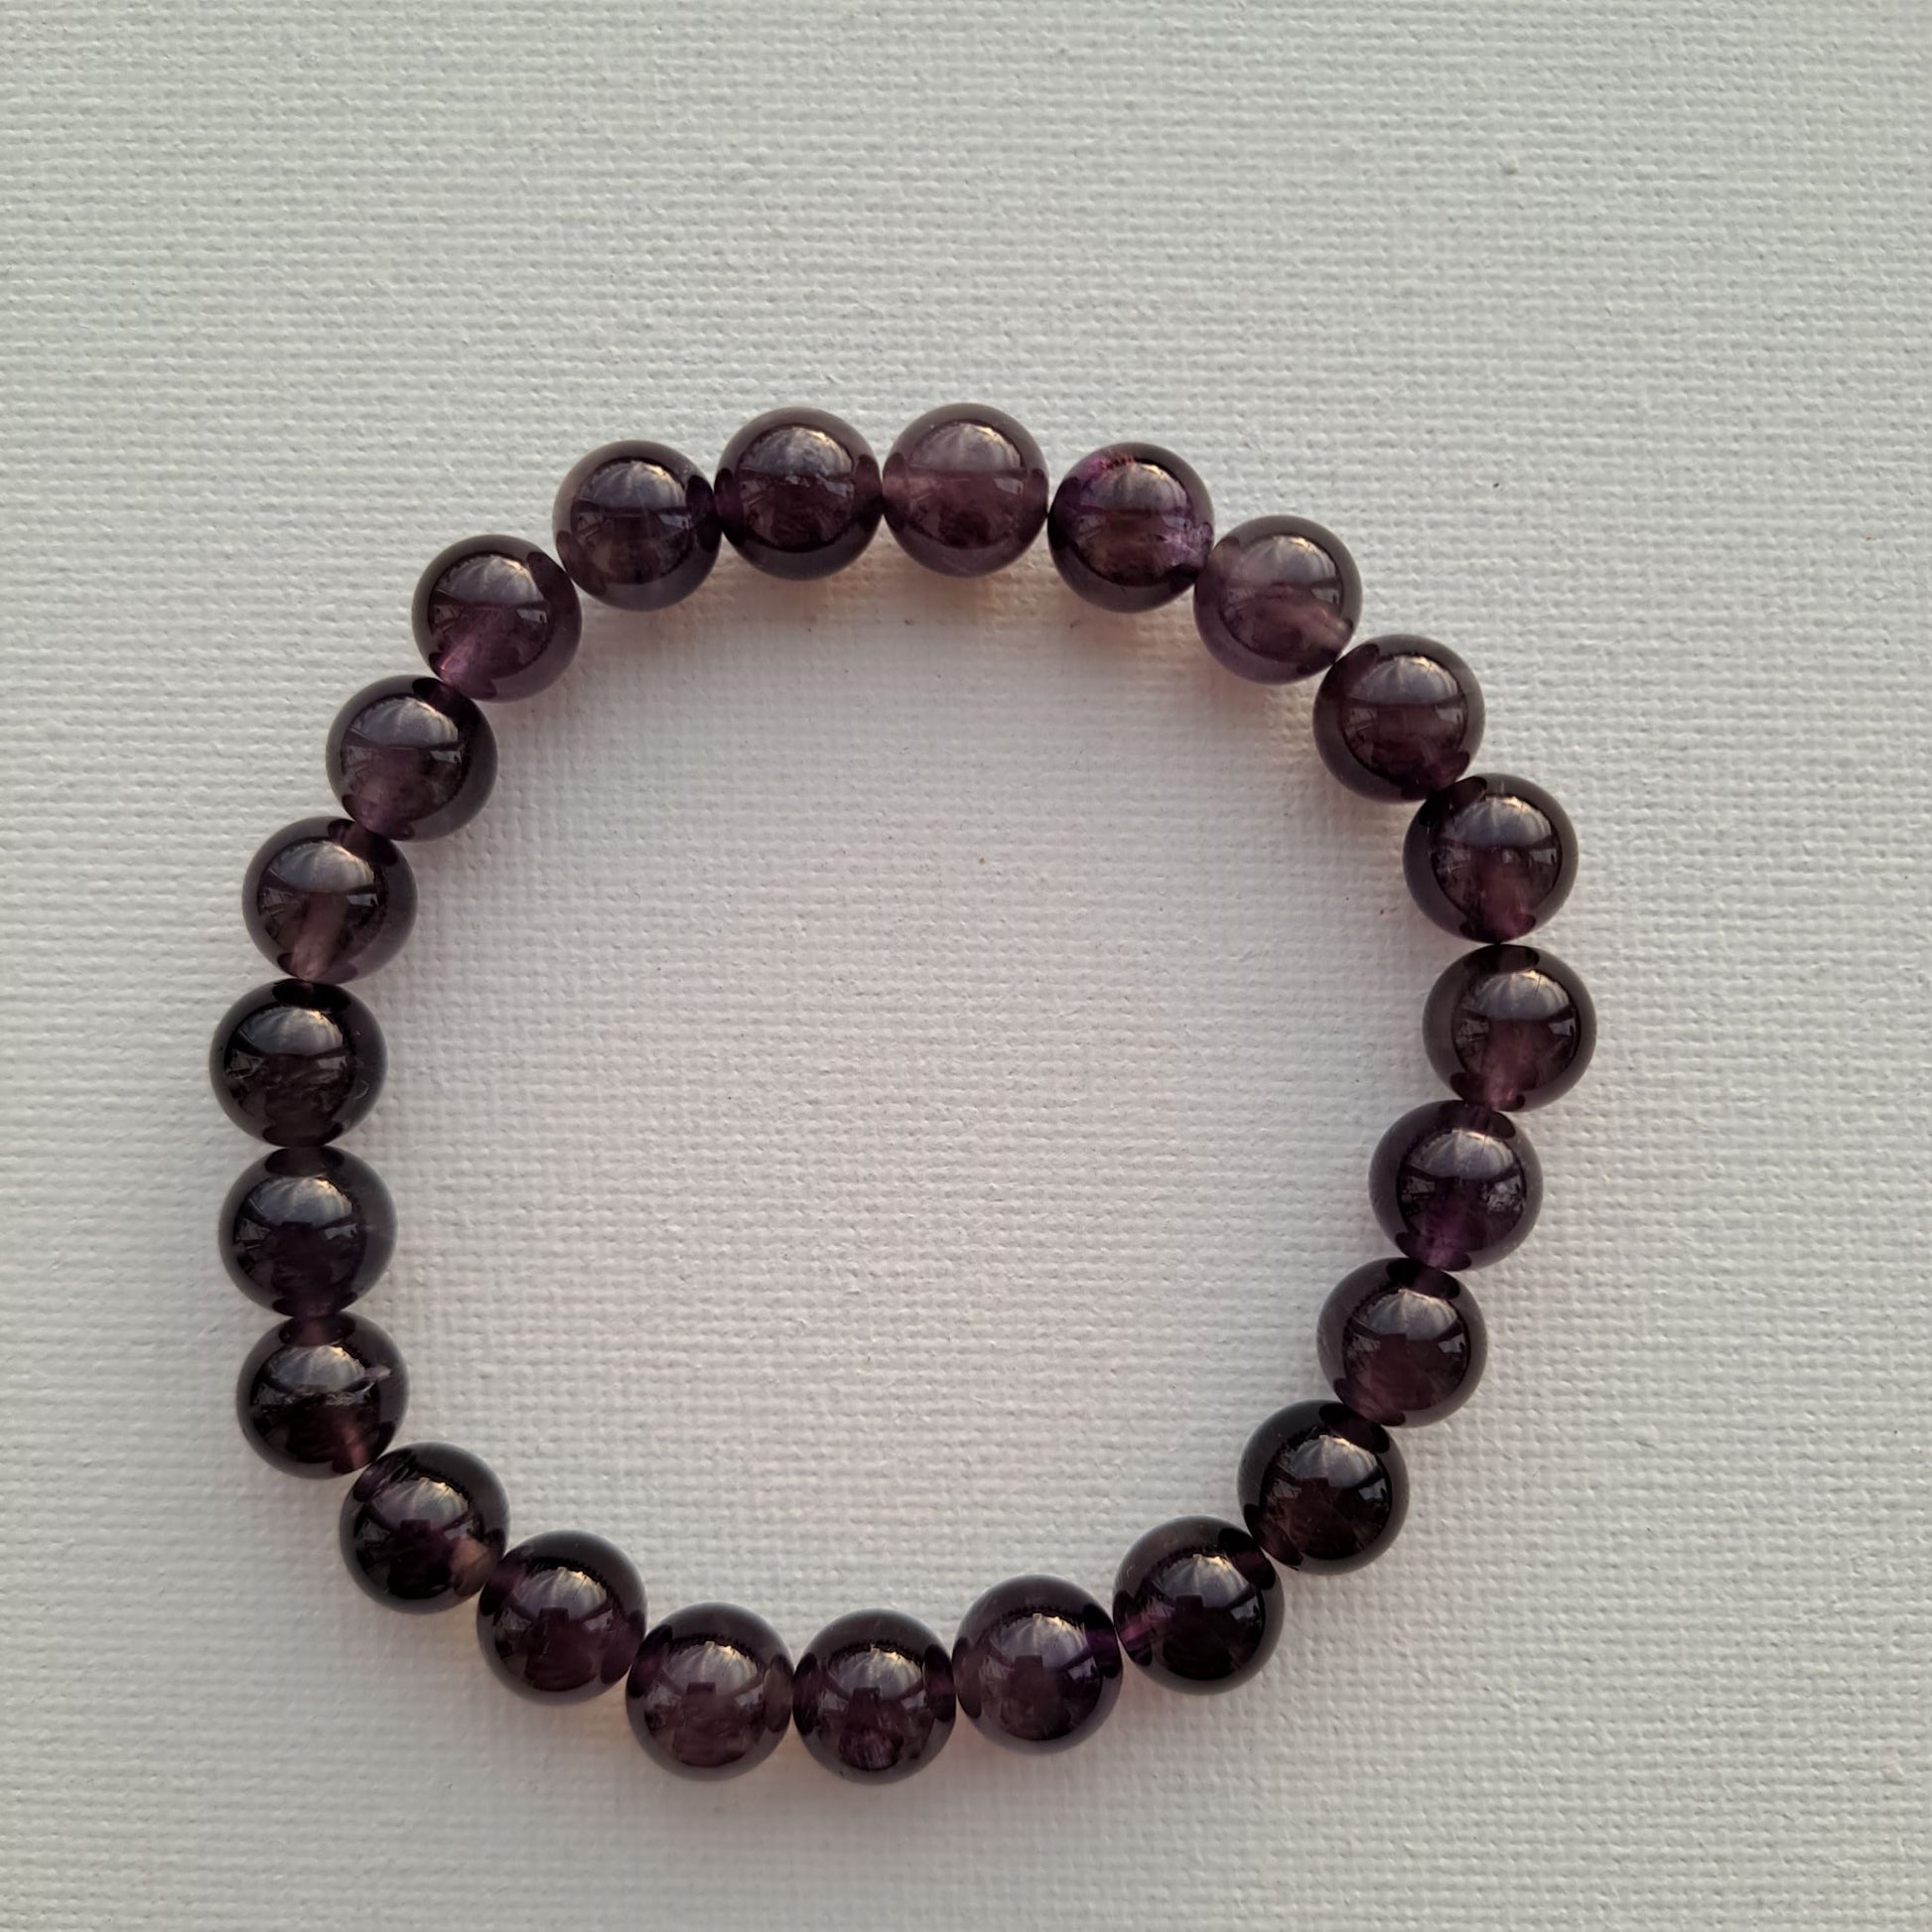 Dumi's Crystals Amethyst Bracelet: Handcrafted with 8mm Amethyst beads for tranquillity, clarity, and spiritual awakening.